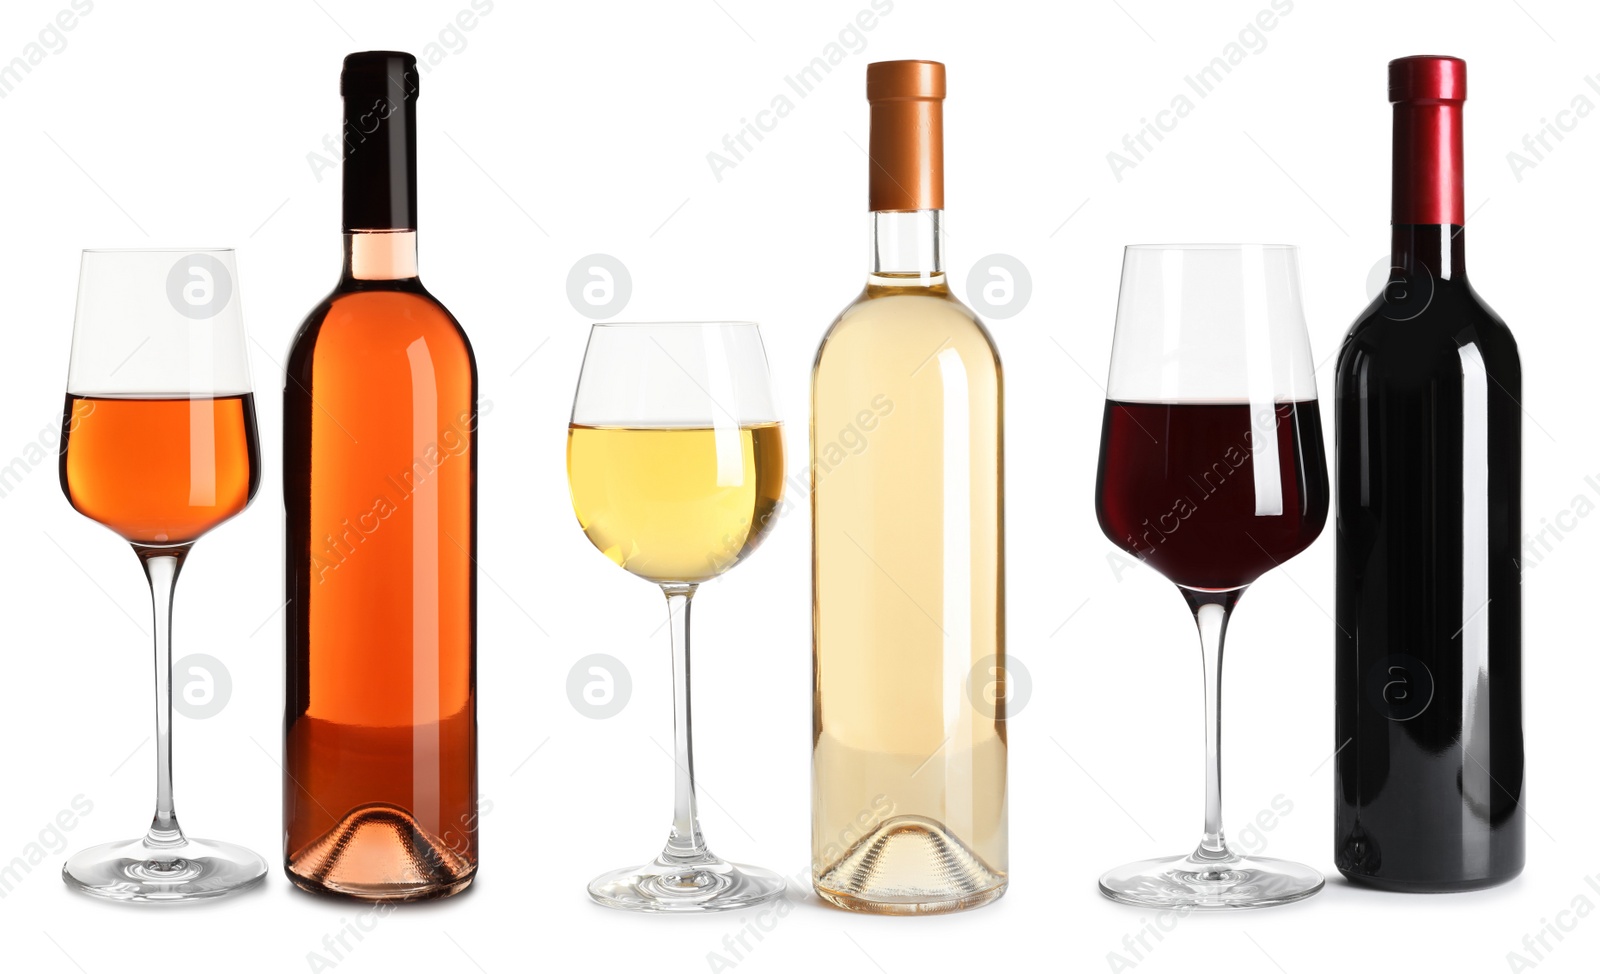 Image of Set with bottles and glasses of different delicious expensive wines on white background